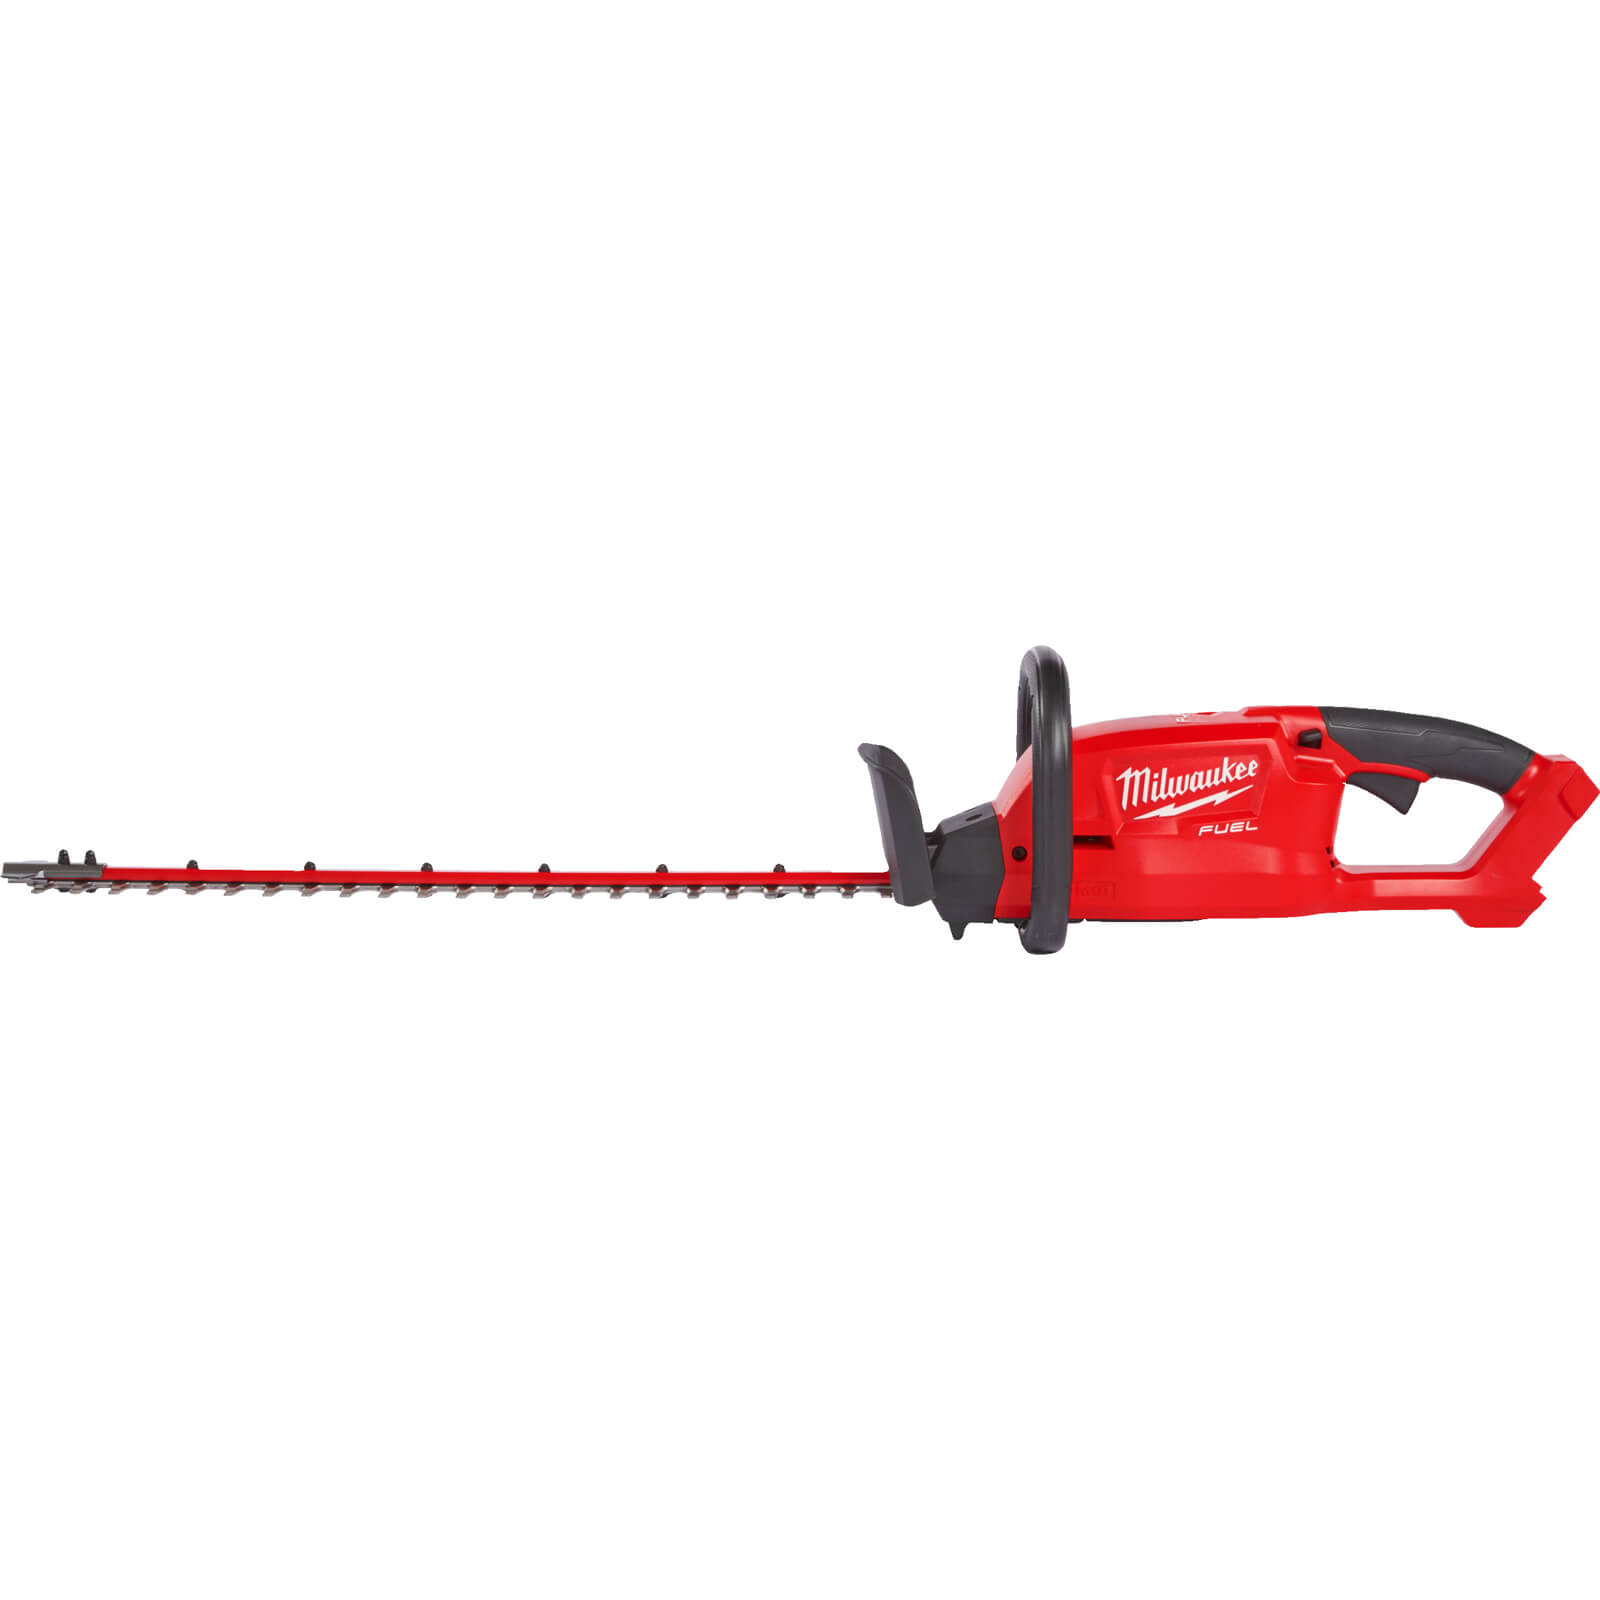 Milwaukee M18 CHT Fuel 18v Cordless Brushless Hedge Trimmer 610mm No Batteries No Charger